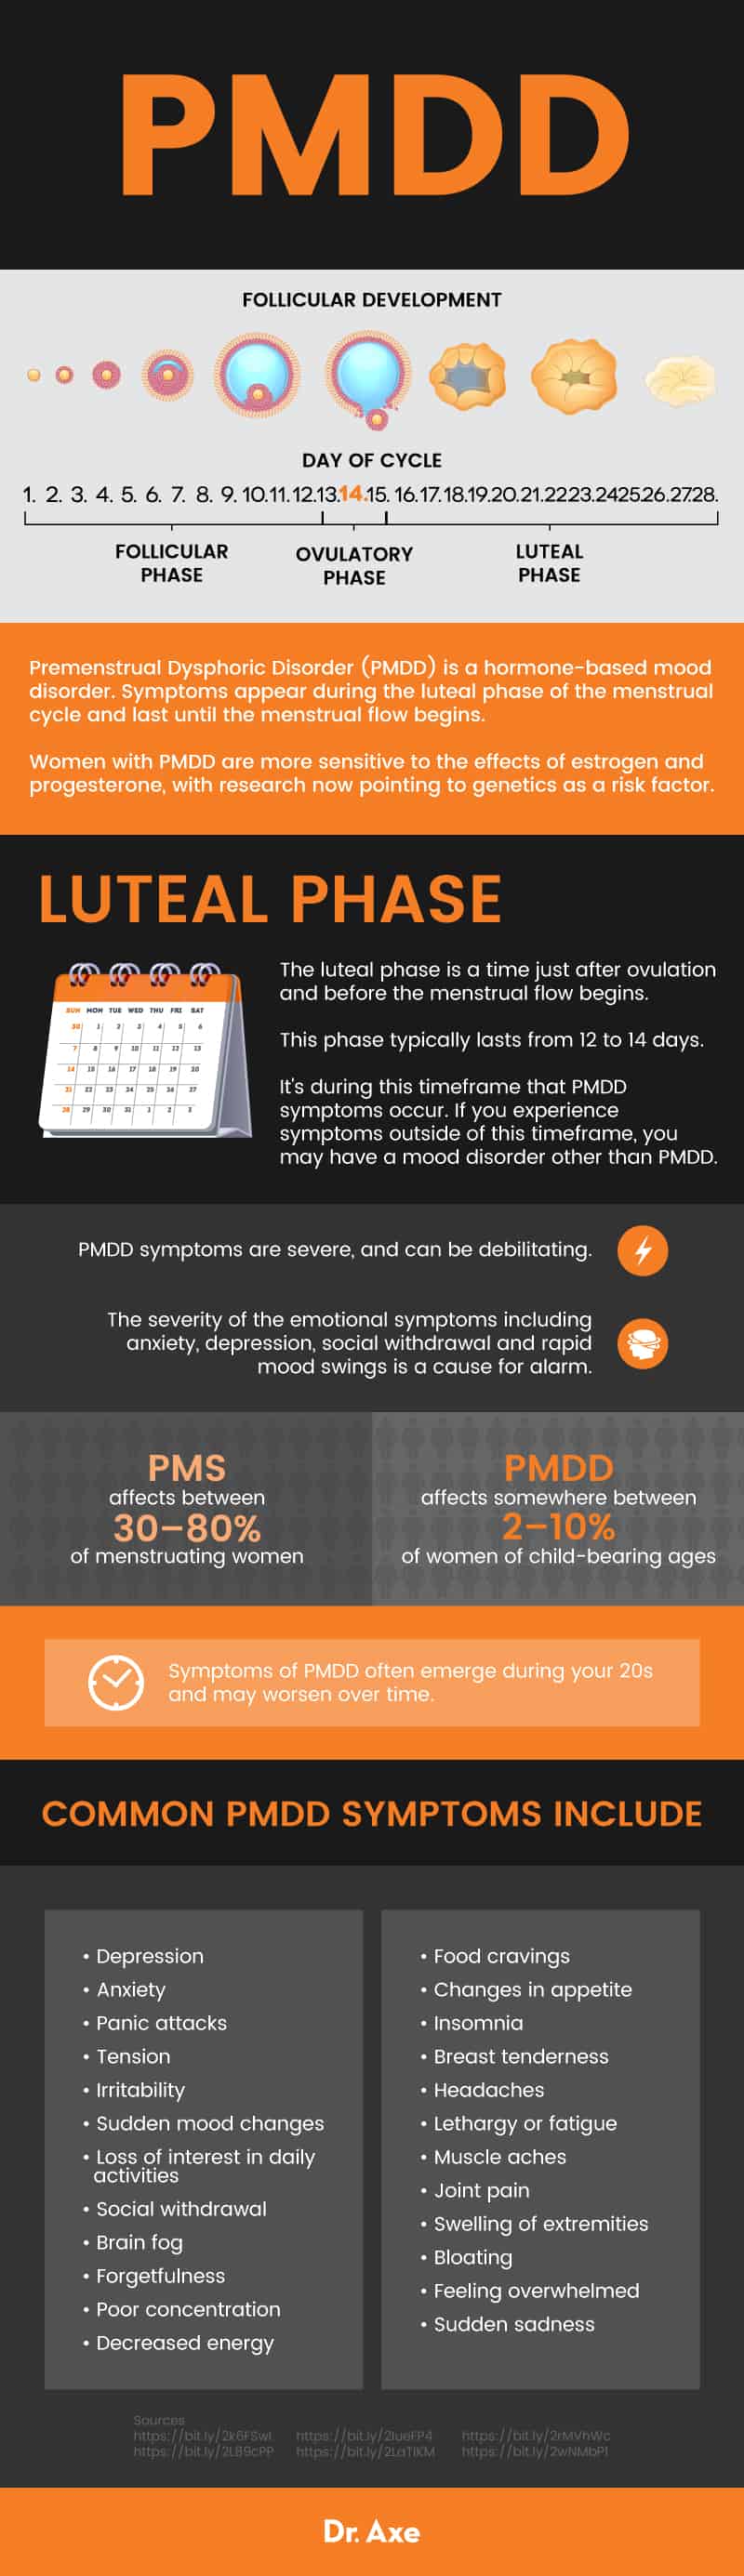 What is PMDD? - Dr. Axe